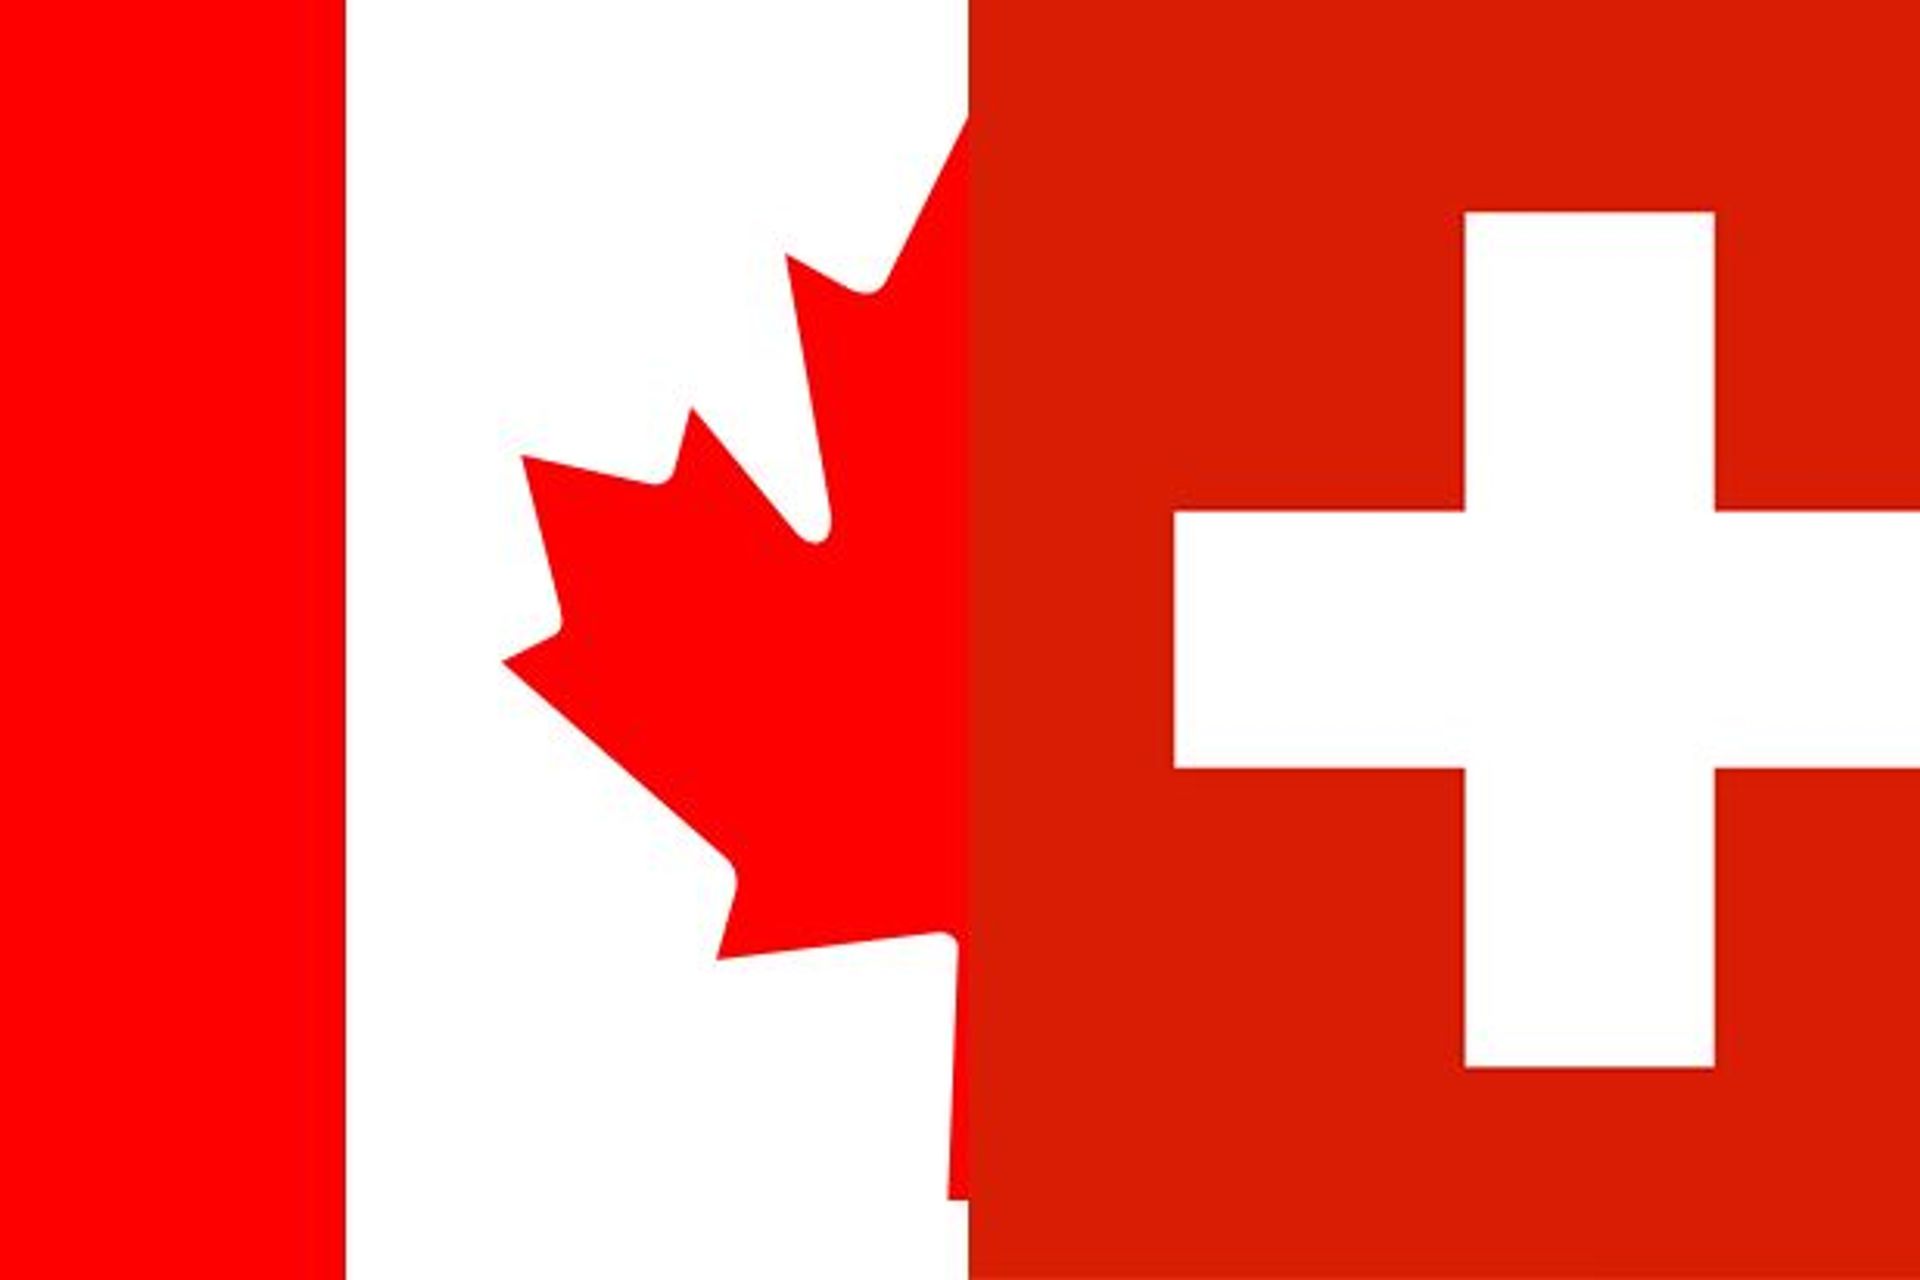 Crasis between the flags of Canada and the Swiss Confederation